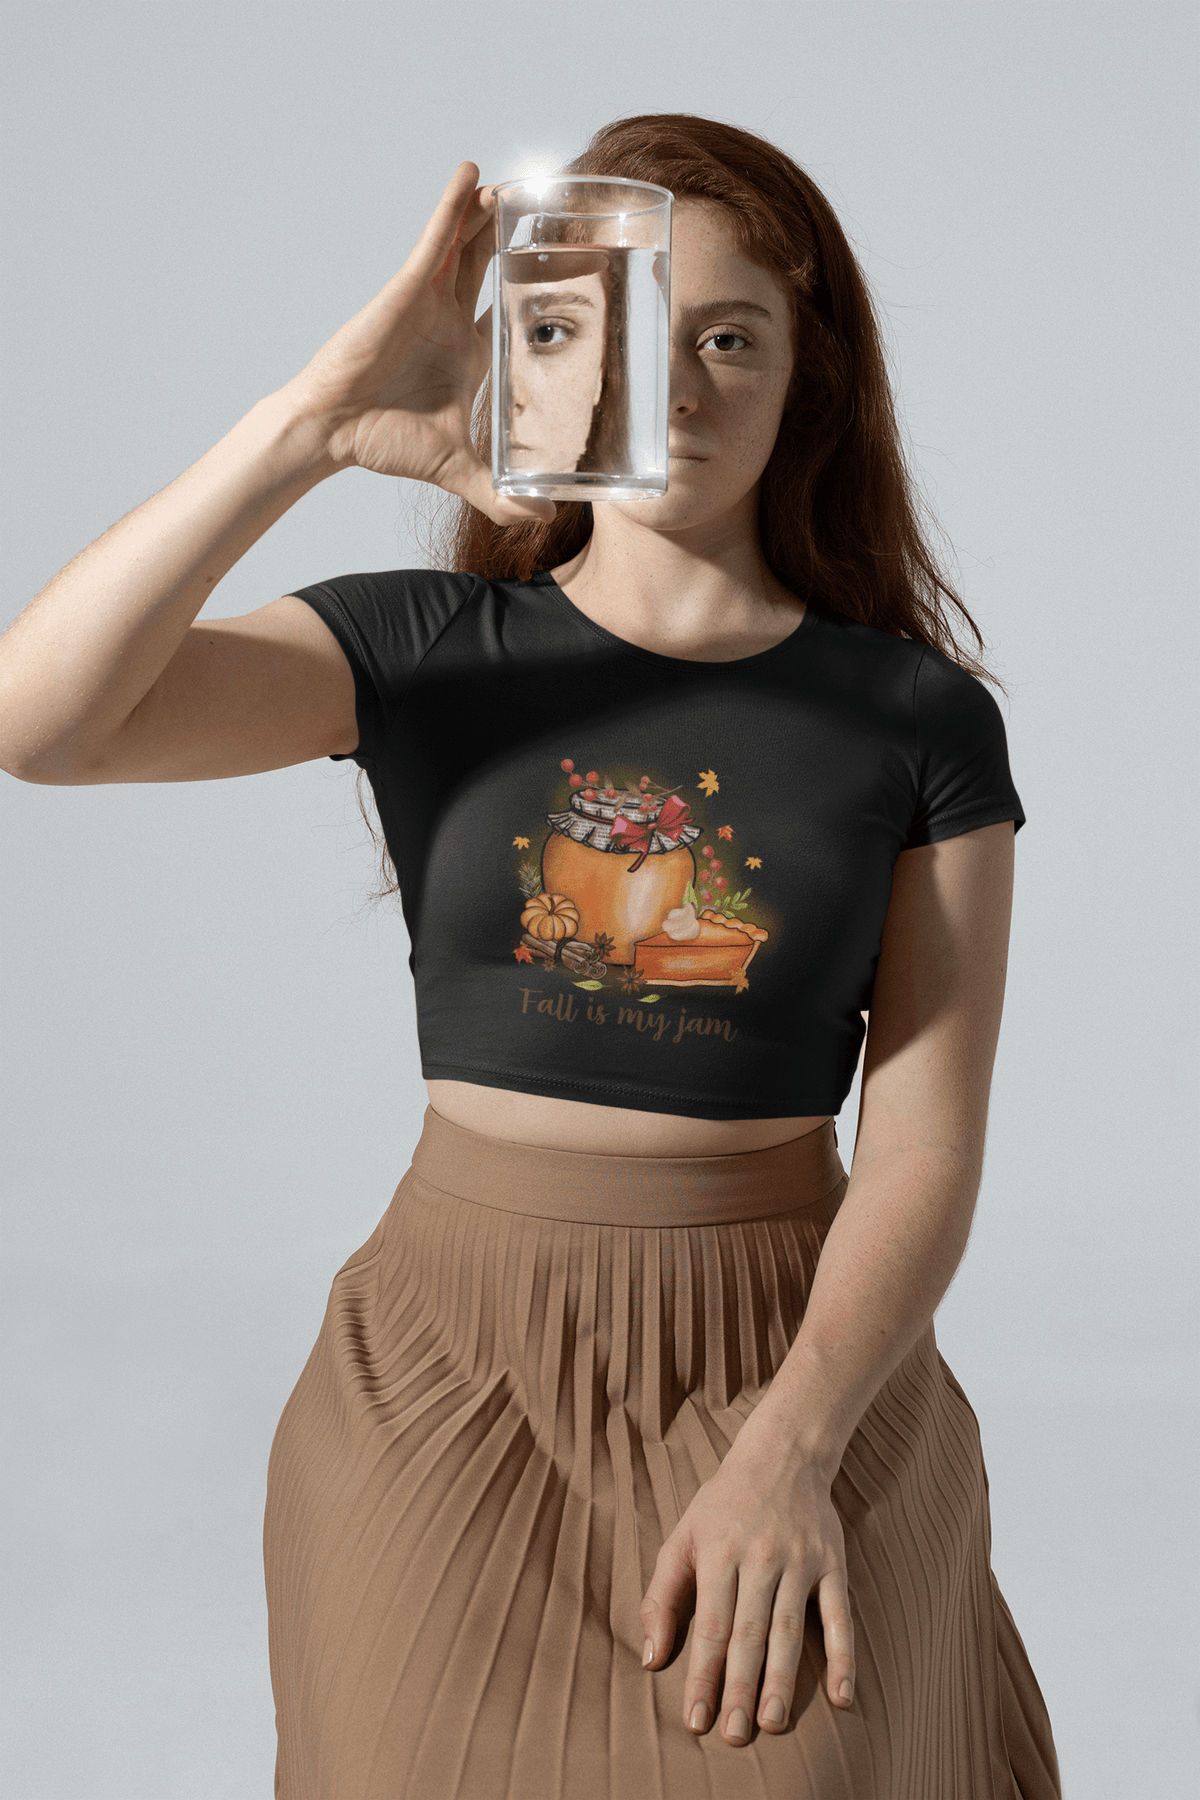 Fall is my Jam Cropped T-Shirt